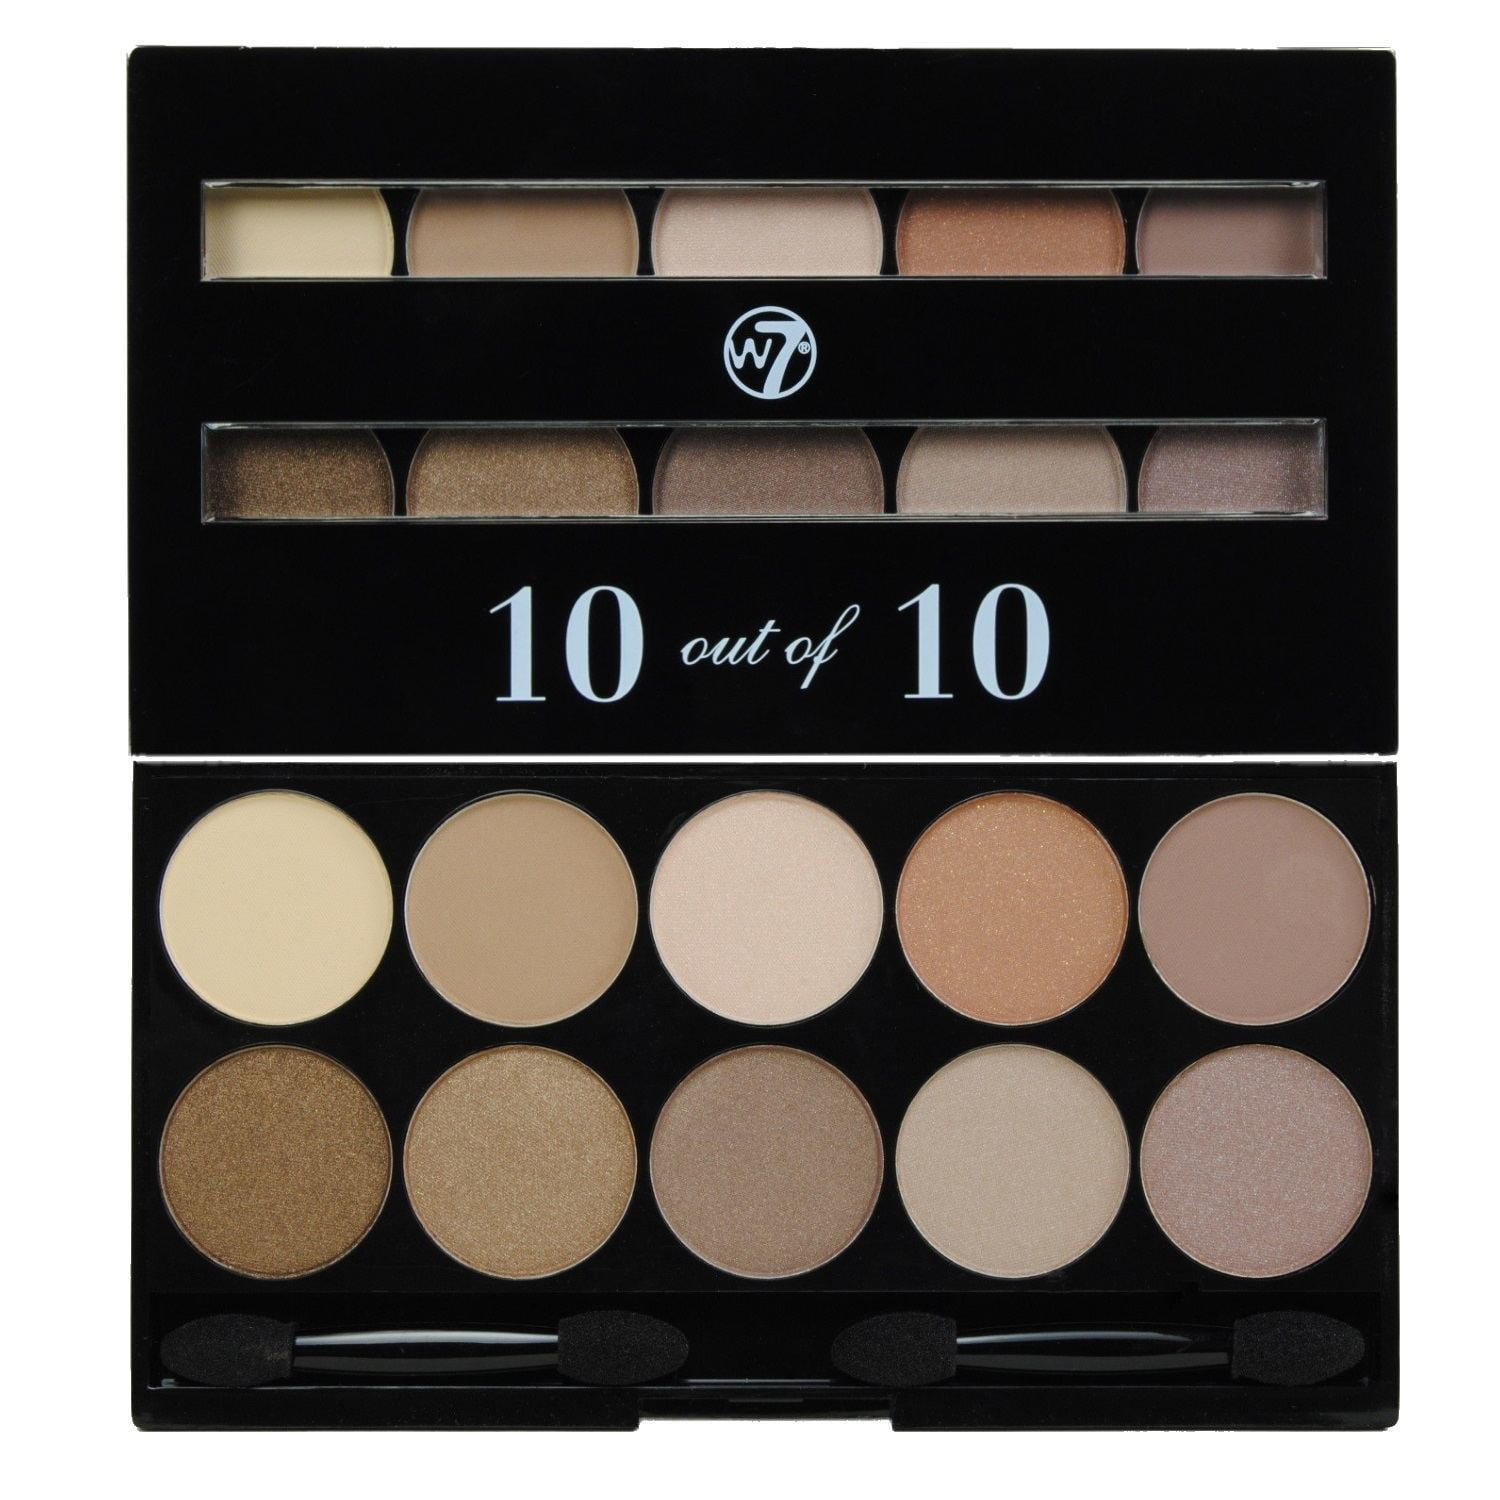 masser Engager Rettelse W7- 10 out of 10 Eyeshadow Palette 10g- Browns - Walmart.com